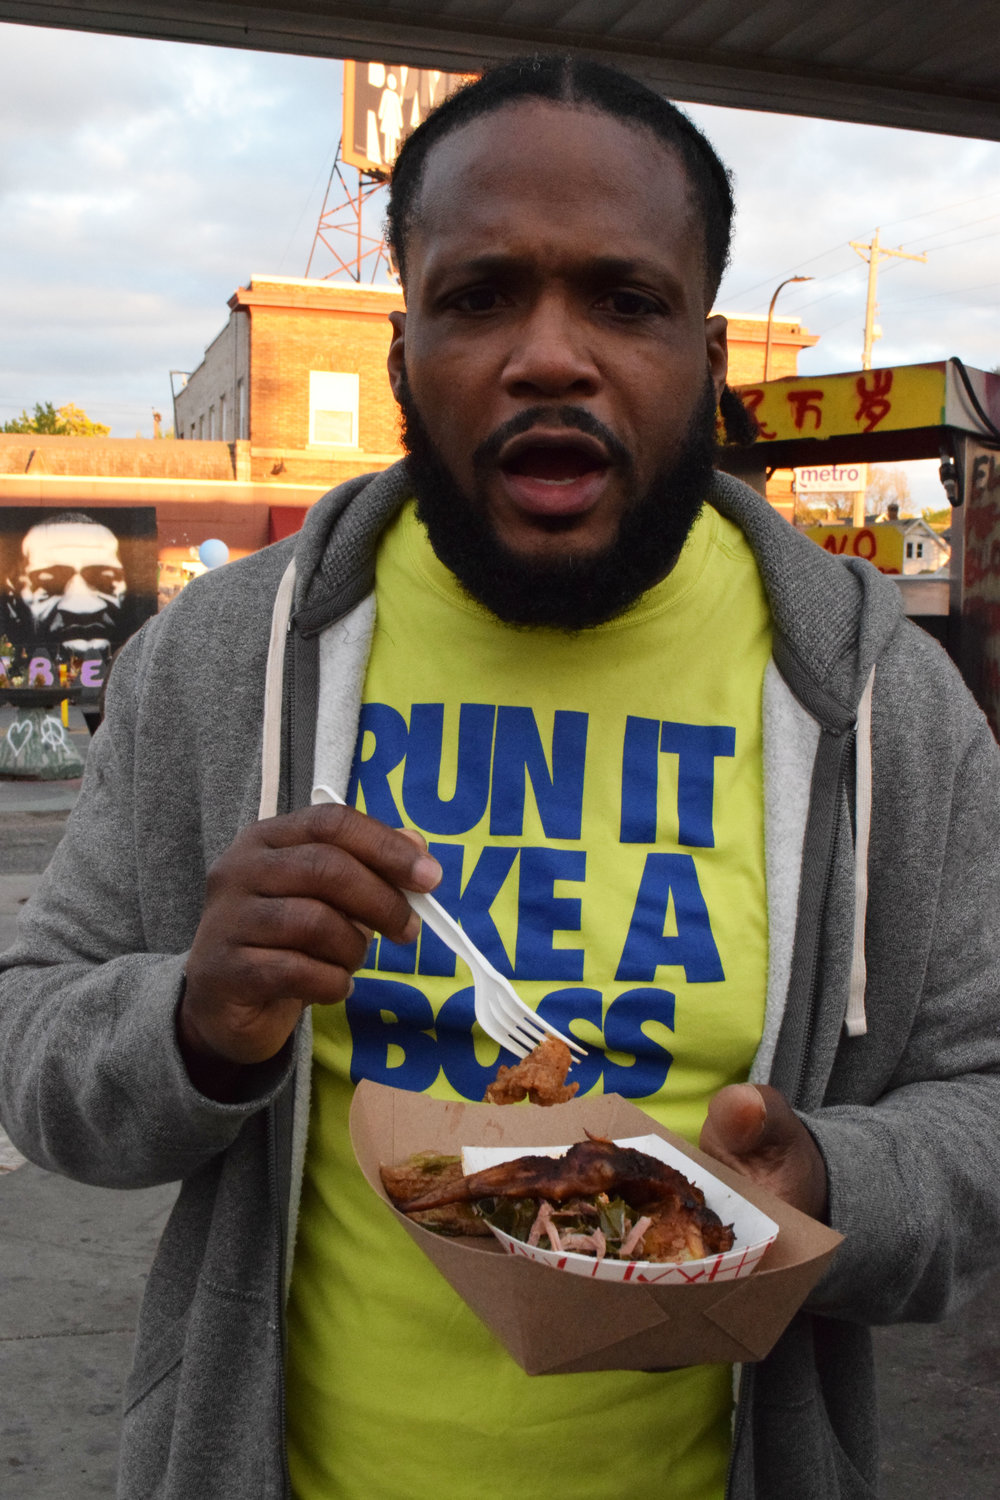 Darryl Green, whose spoken word can be found under Chatterlac on YouTube, tucks into a meal provided by The Igloo Café. House of Gristle and Sisters Camelot also provide free meals at the event.